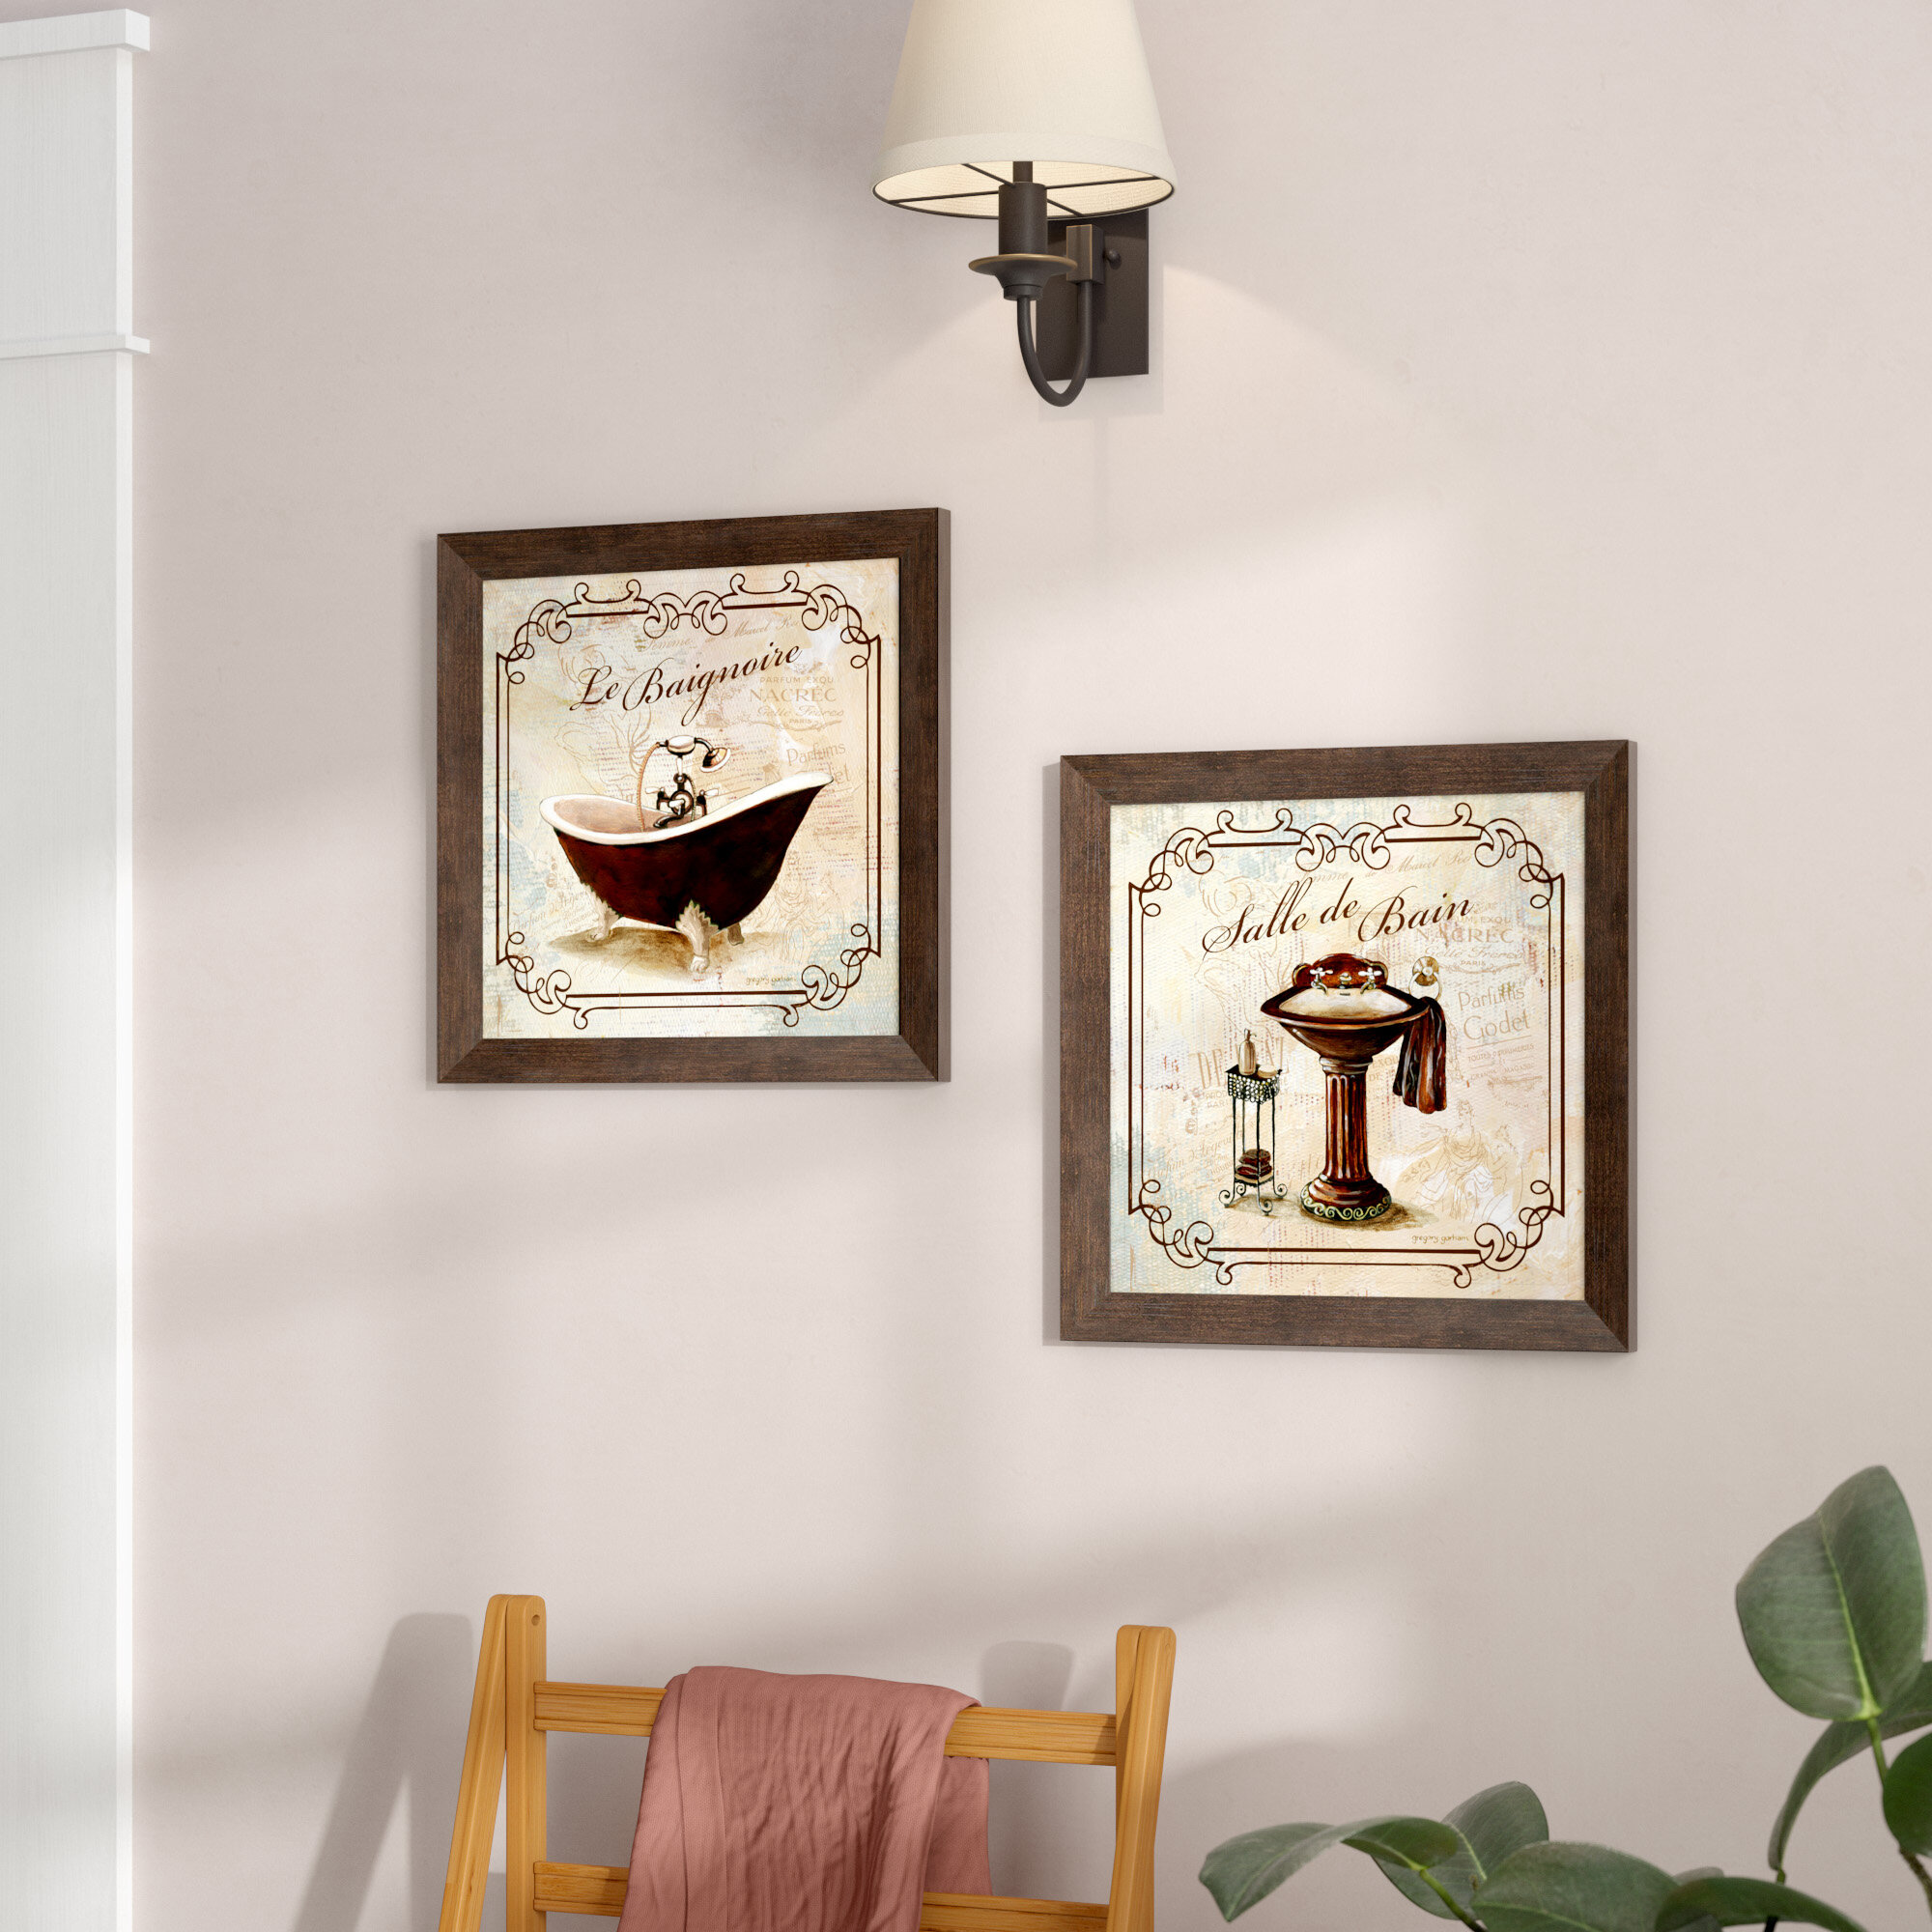 virkningsfuldhed Skæbne Forinden Red Barrel Studio® Classic Prints For Decorating Bathroom; Salle De Bain  And Le Baignoire On Canvas 2 Pieces by Gregory Gorham Painting & Reviews |  Wayfair